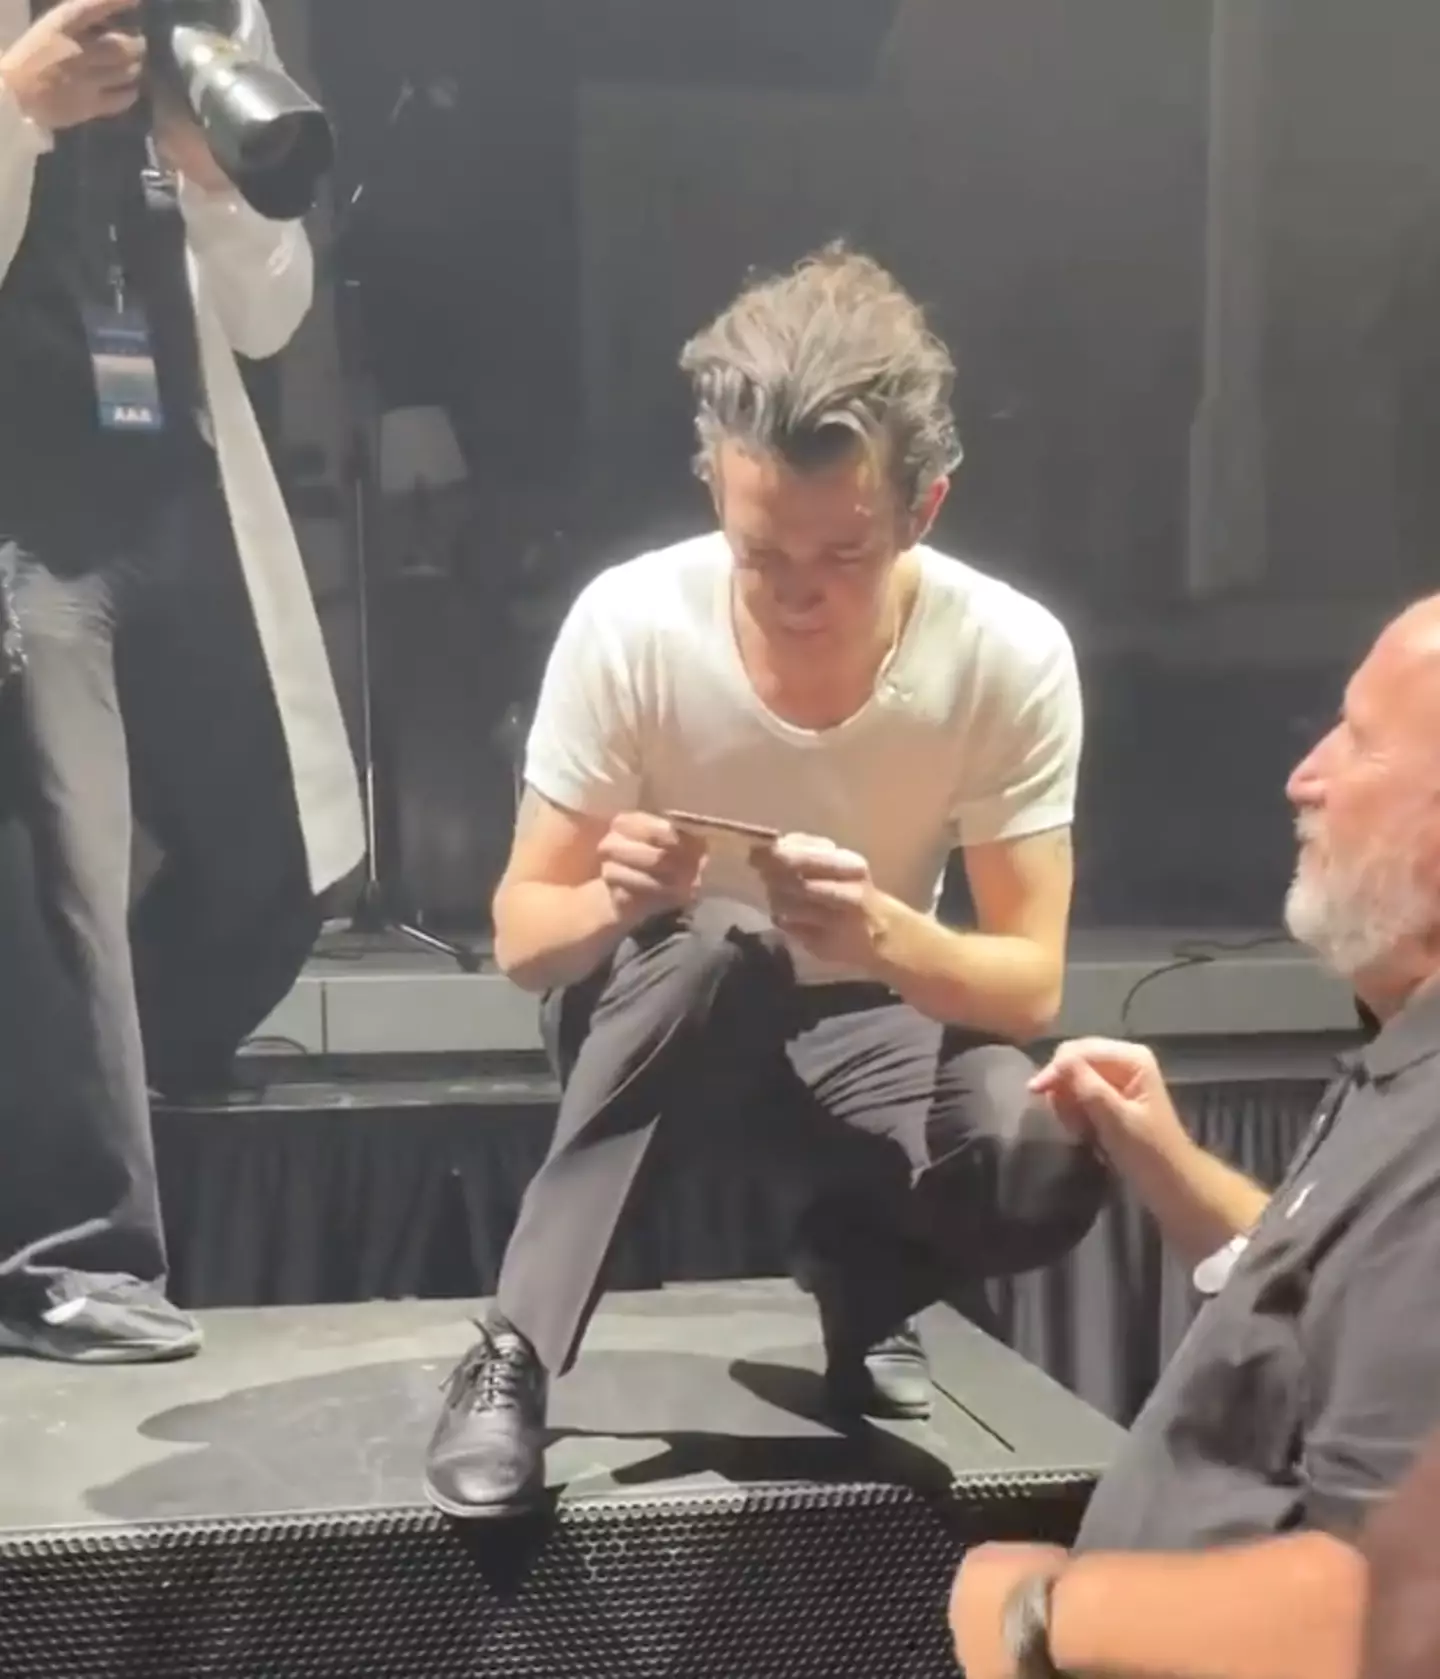 Matt Healy checked the fan's identification and age before kissing her.